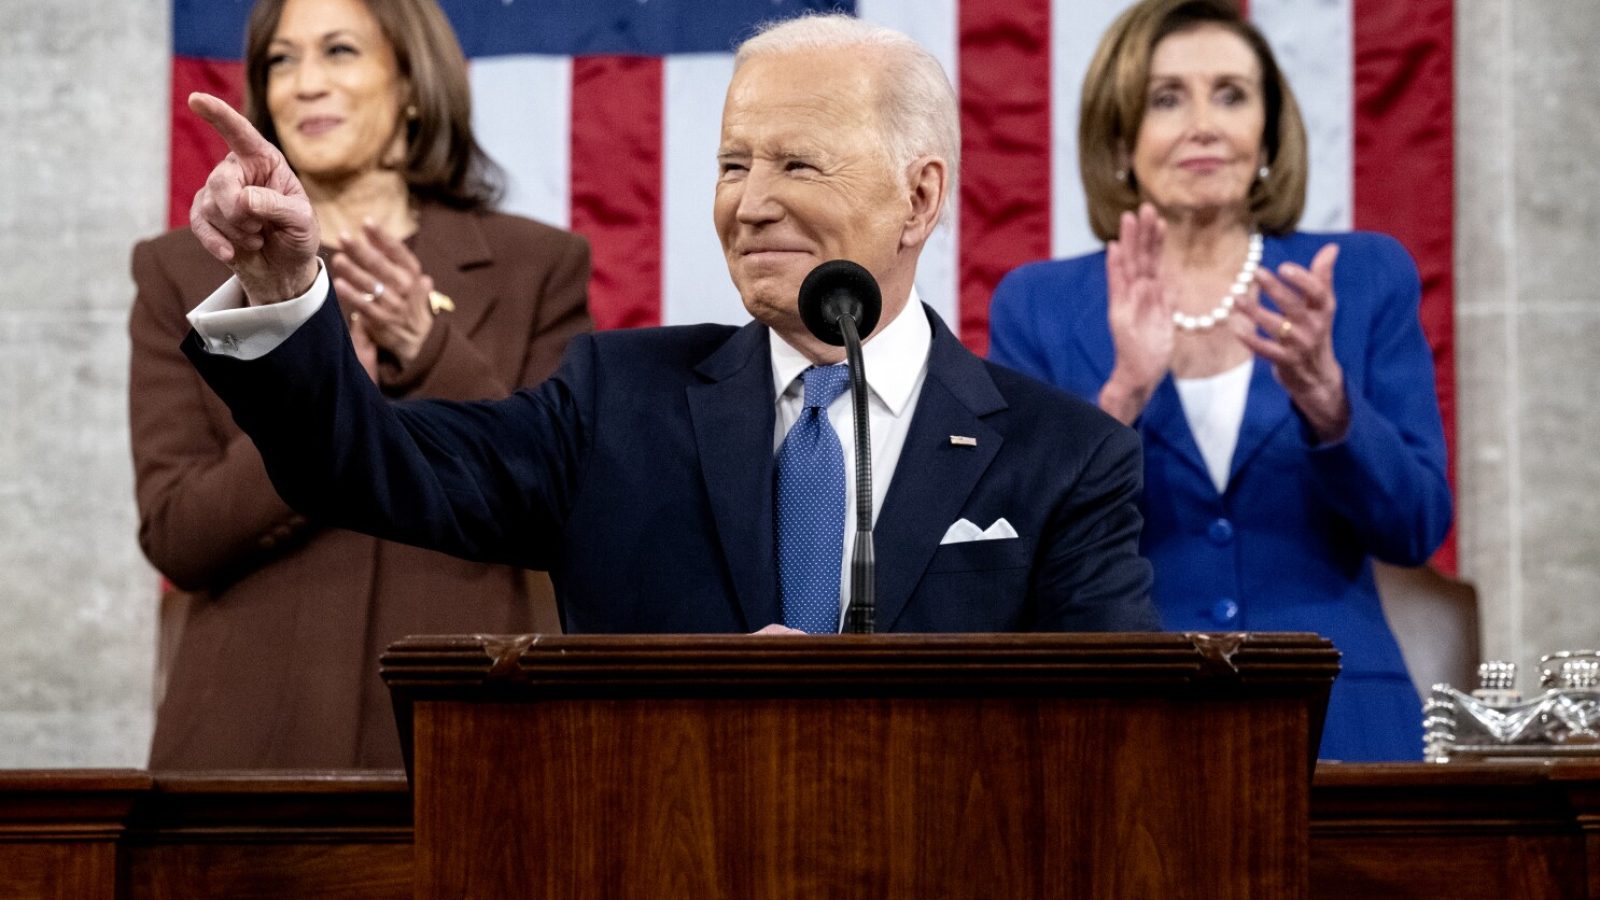 President Biden giving his State of the Union Address, flanked by VP Harris and Speaker Pelosi